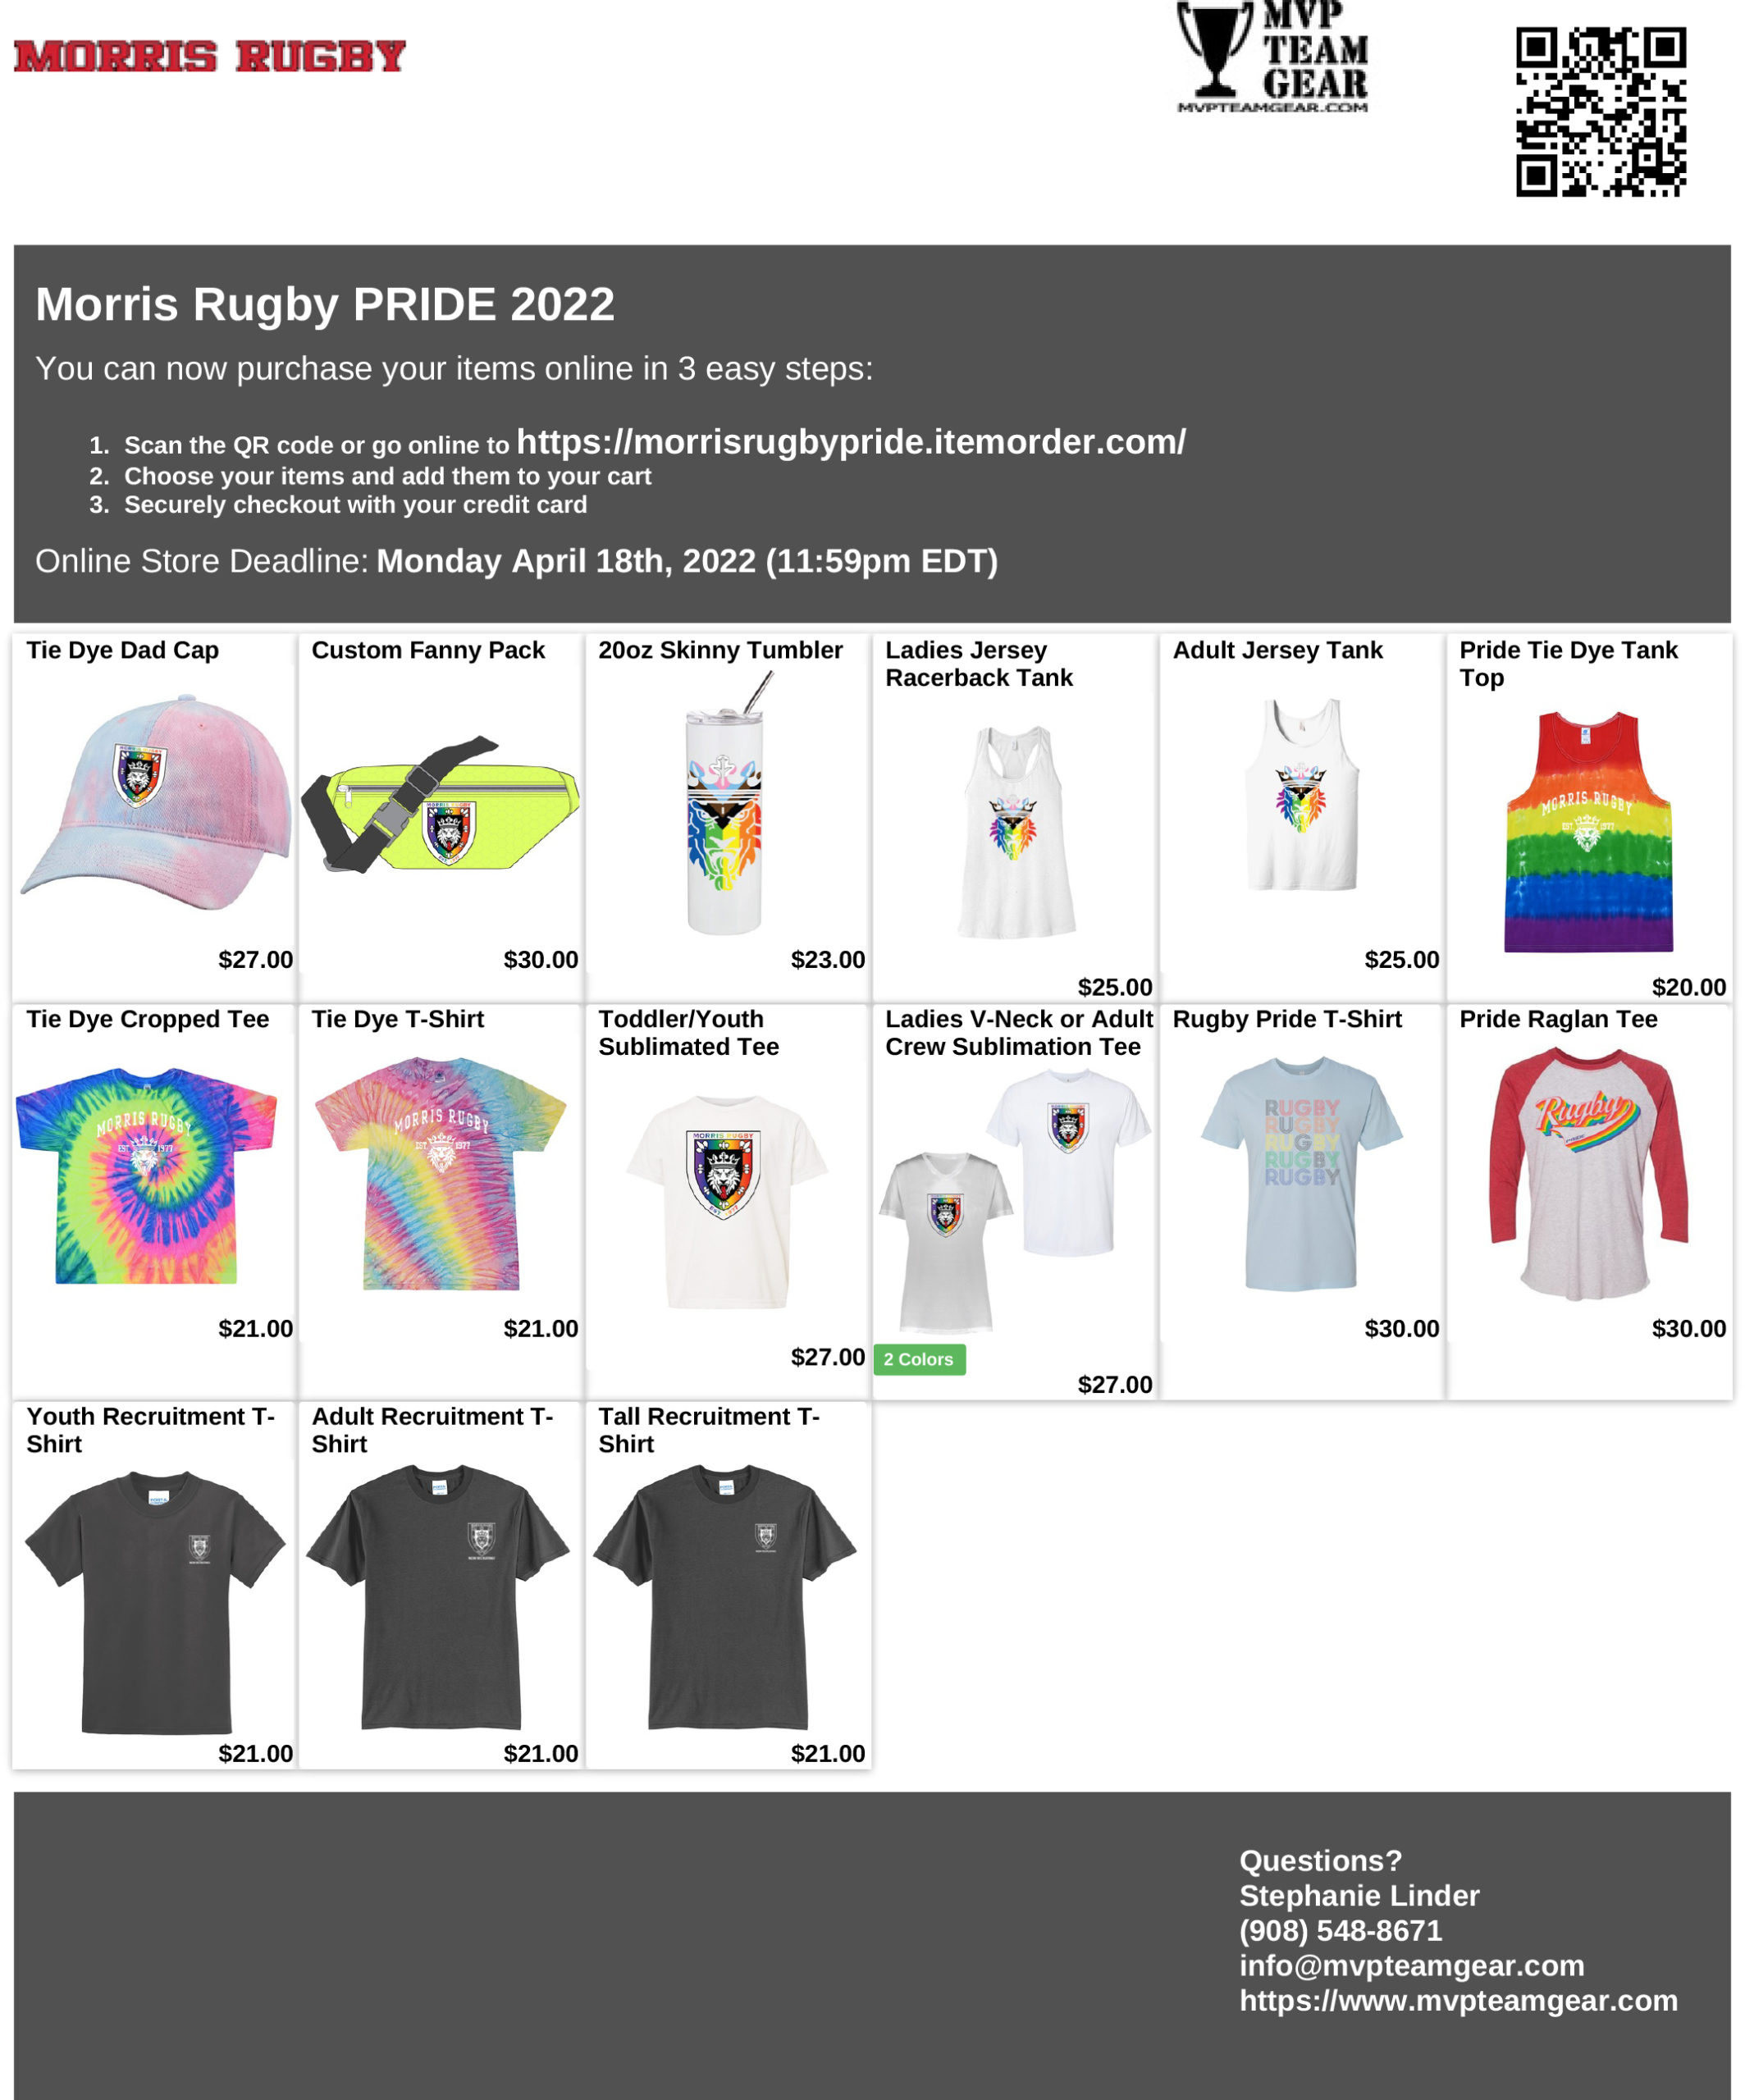 Limited Edition Morris Rugby Pride Gear Available Through April 18th